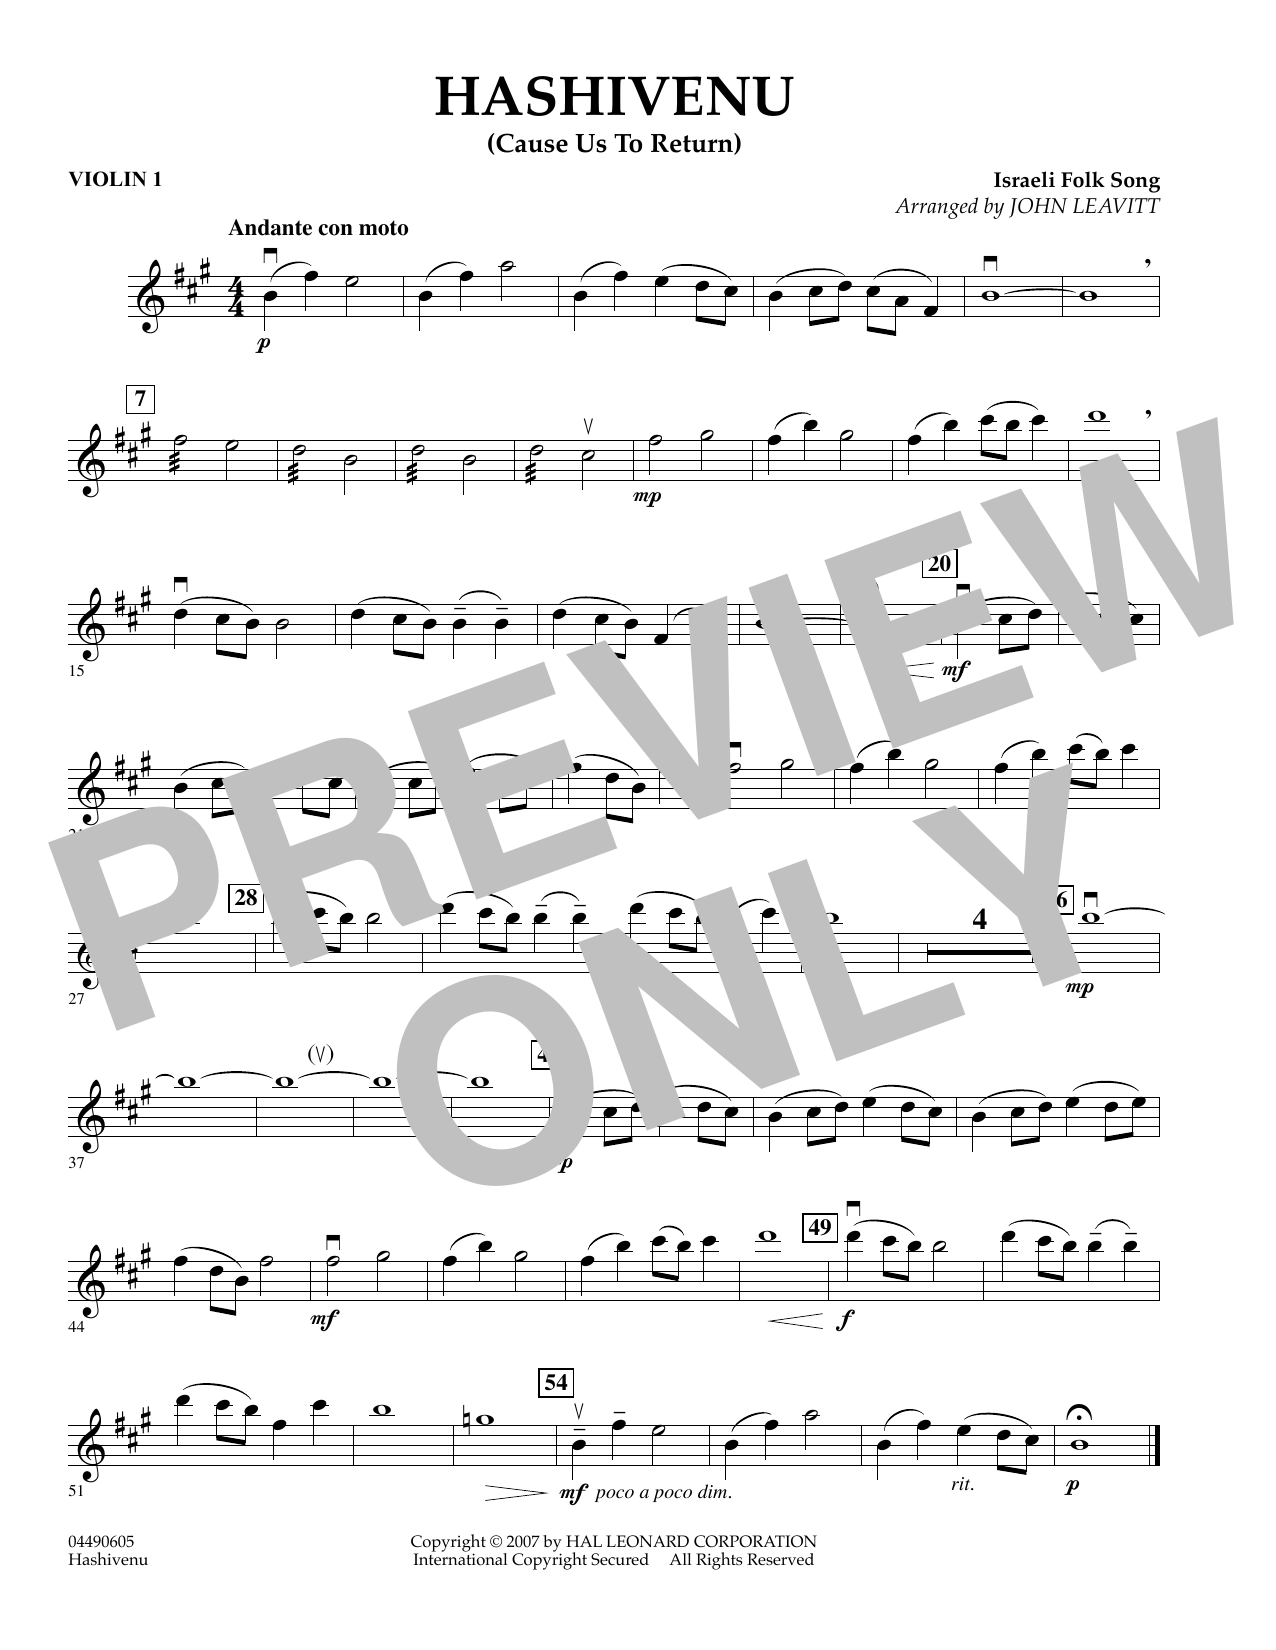 John Leavitt Hashivenu (Cause Us to Return) - Violin 1 sheet music preview music notes and score for Orchestra including 1 page(s)